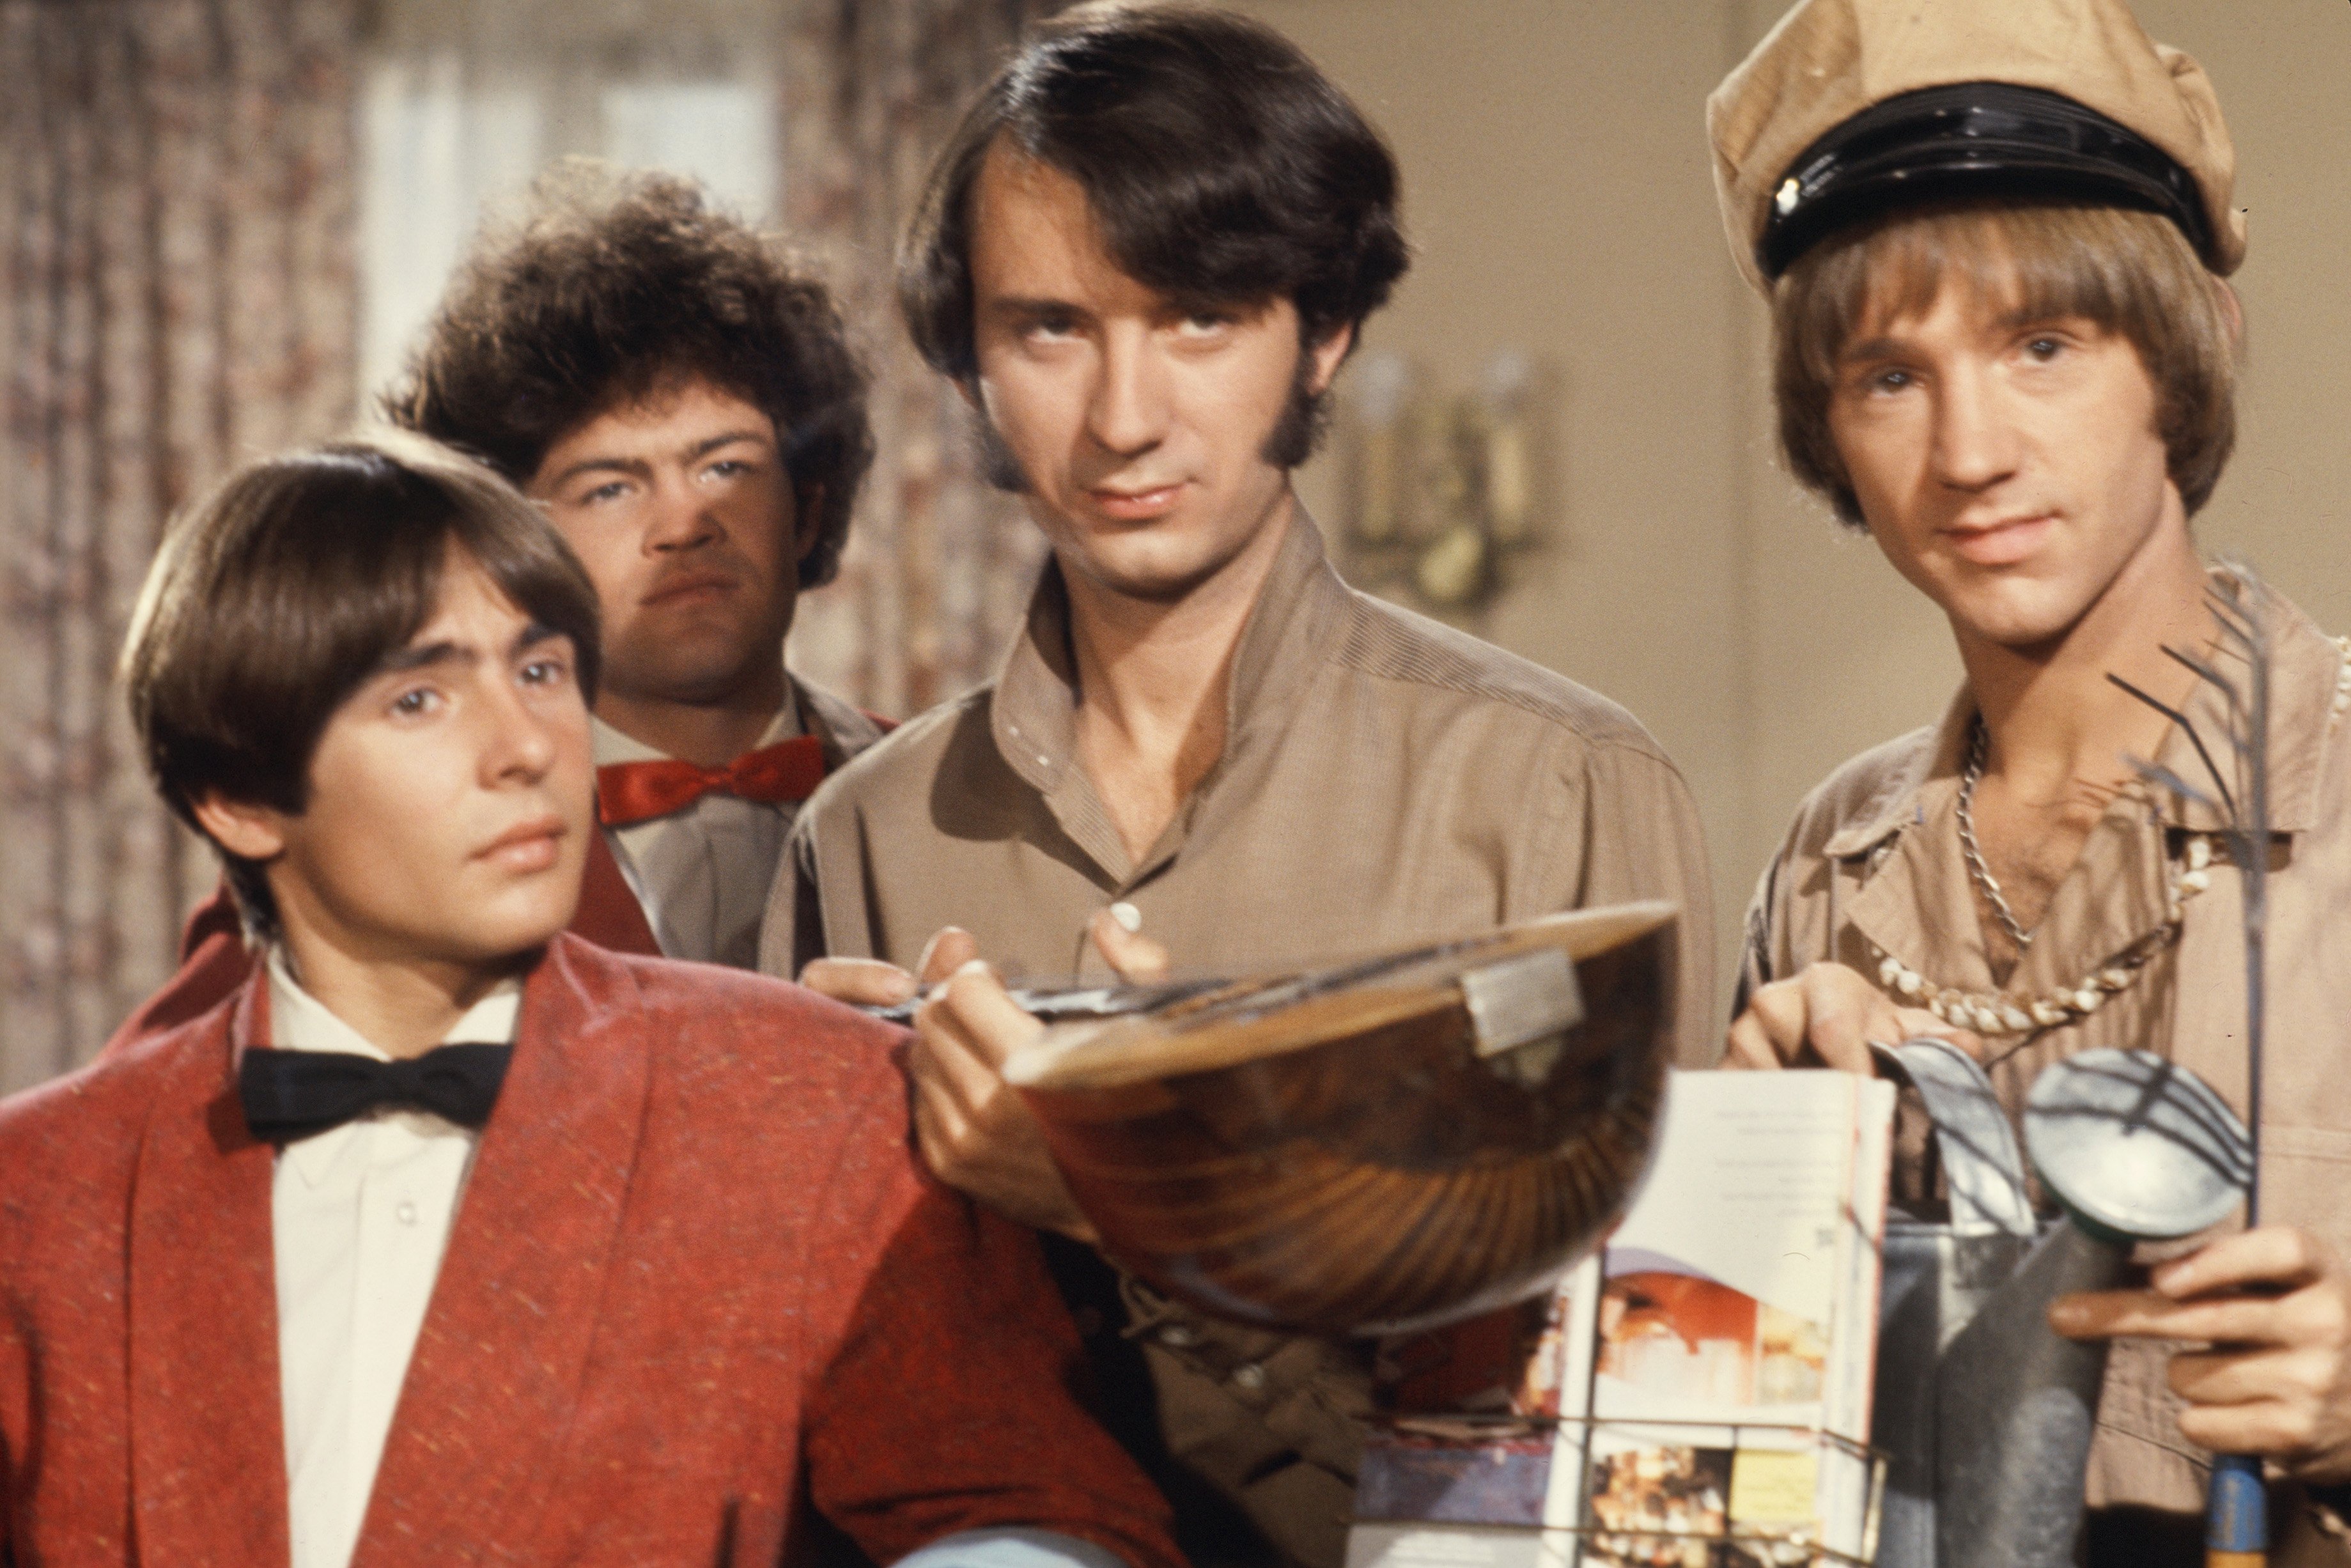 The Monkees' Davy Jones, Mickey Dolenz, Mike Nesmith, and Peter Tork standing